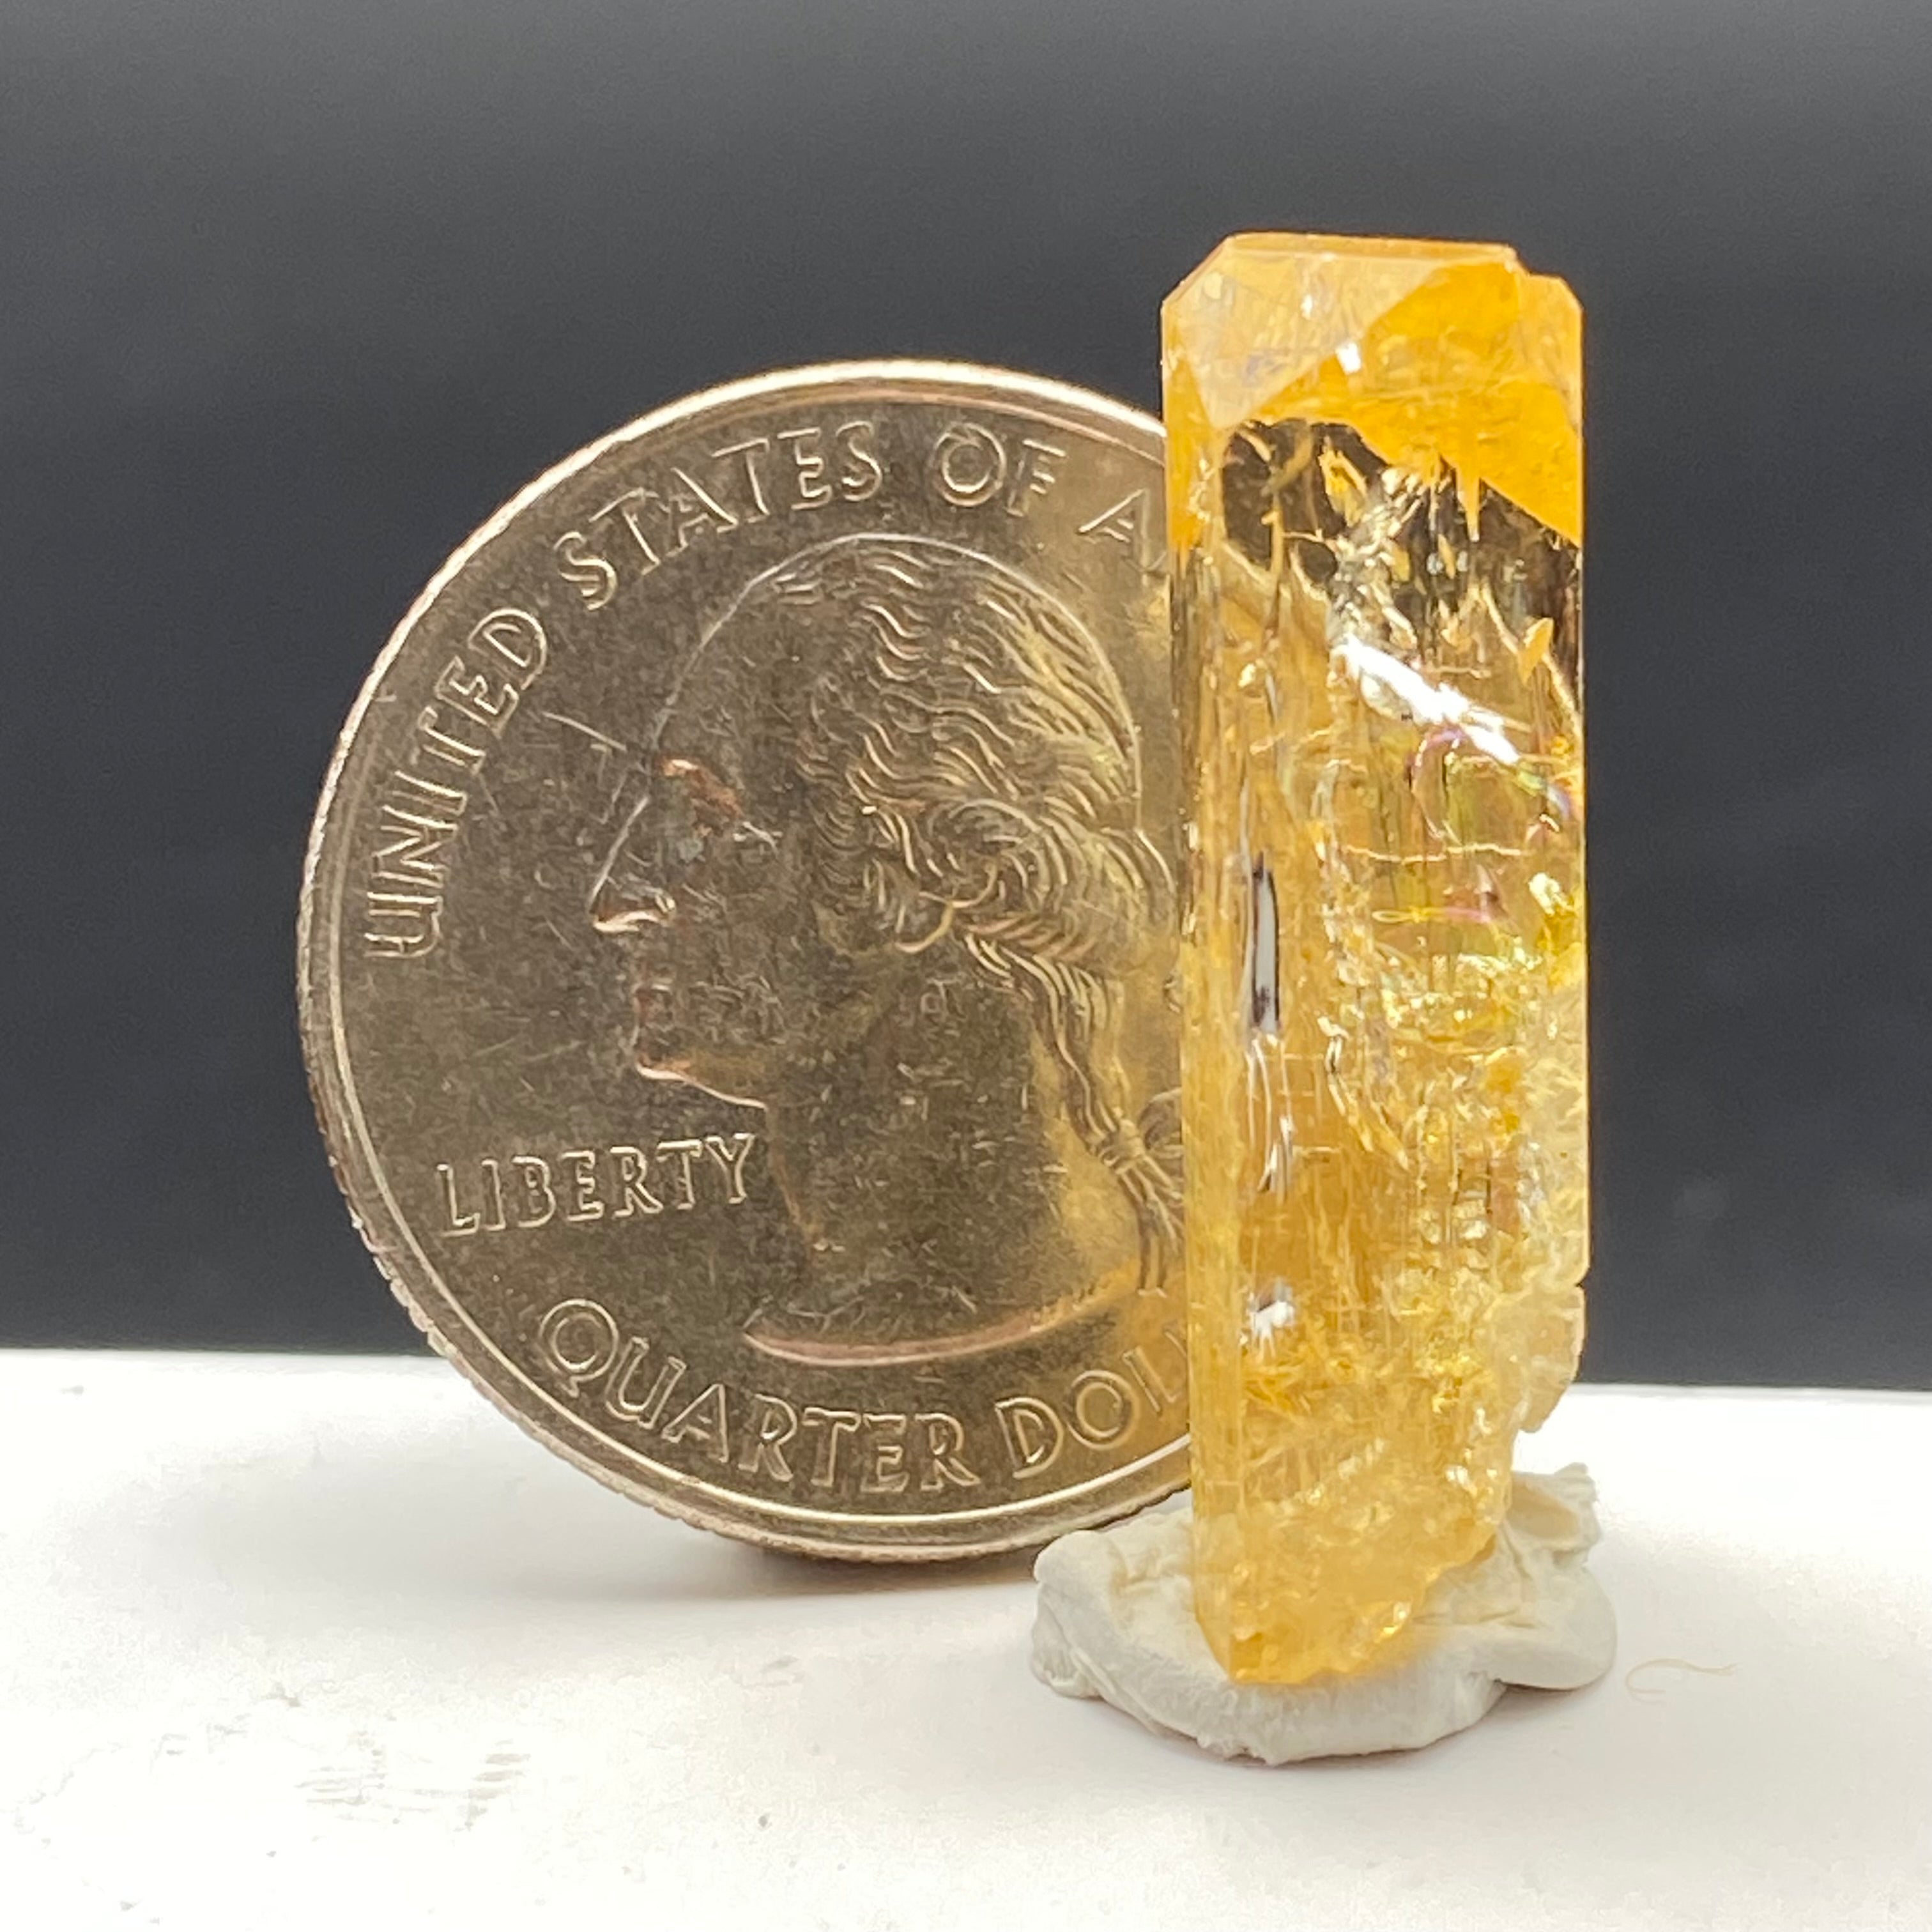 Imperial Topaz Natural Full Terminated Crystal - 109